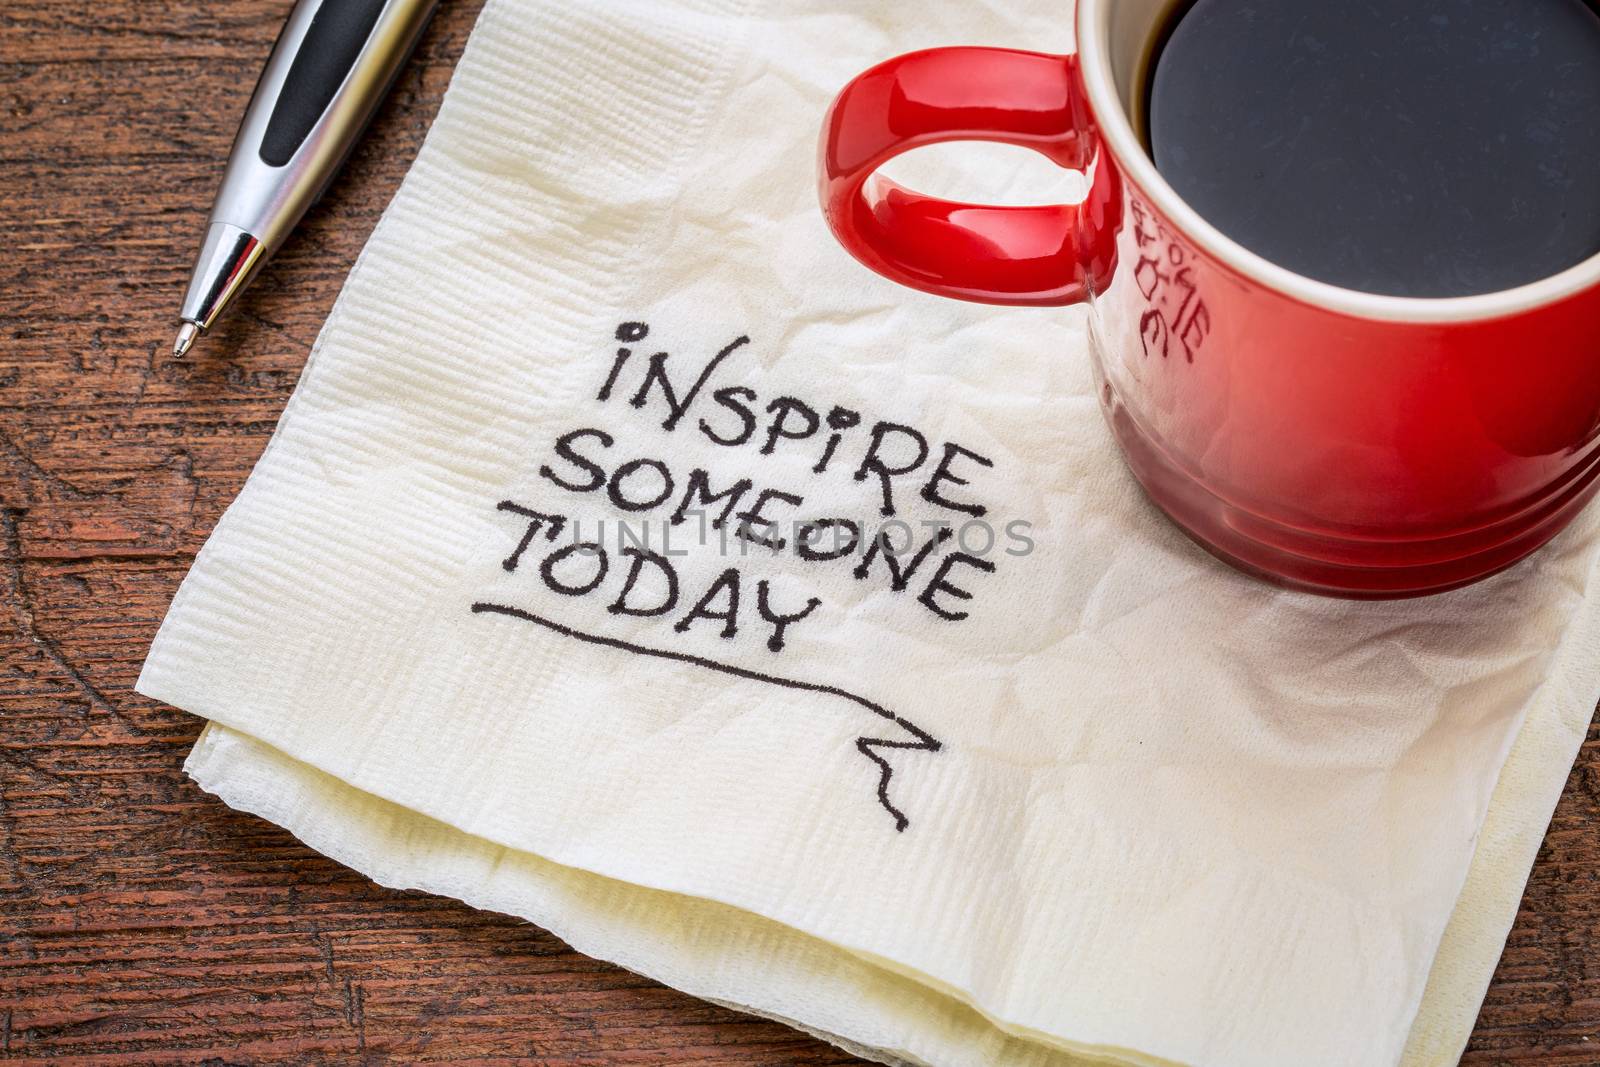 inspire someone today - motivational handwriting on a napkin with cup of coffee